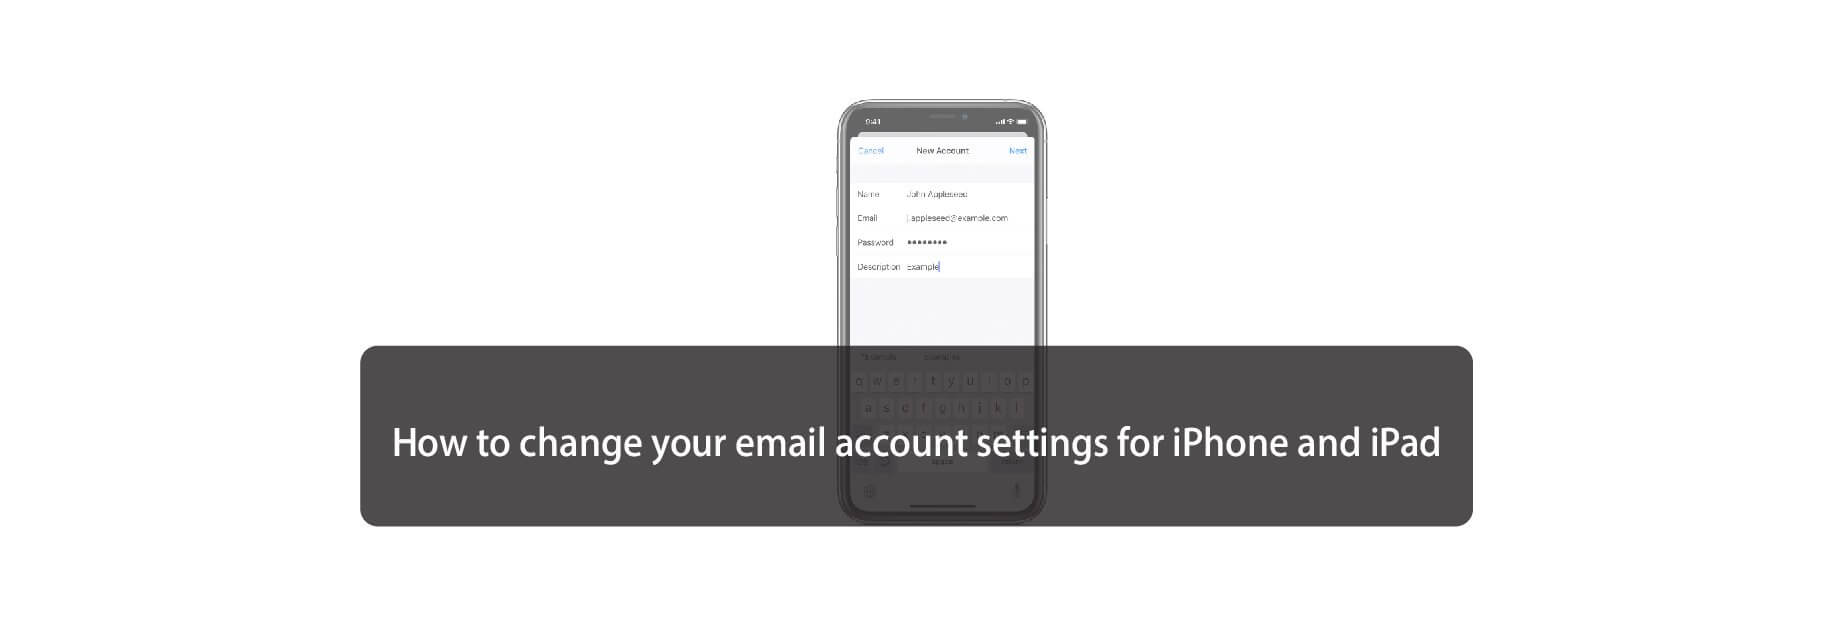 How to change your email account settings for iPhone and iPad